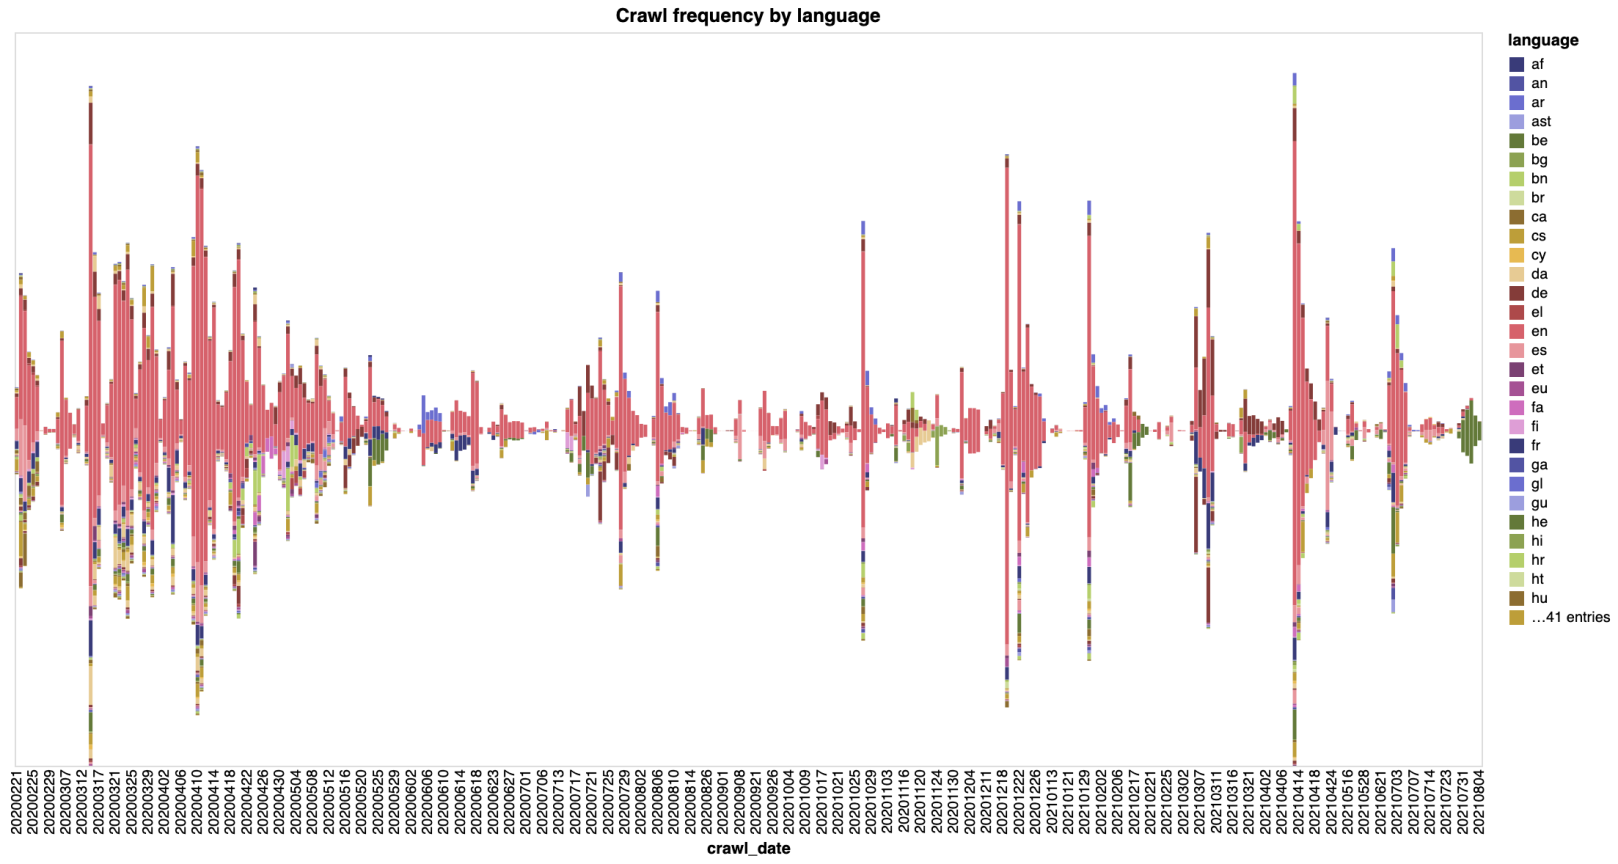 Graph visualizing crawl frequency by language, generated by yhe AWAC2 cohort using pandas and Altair libraries for Python